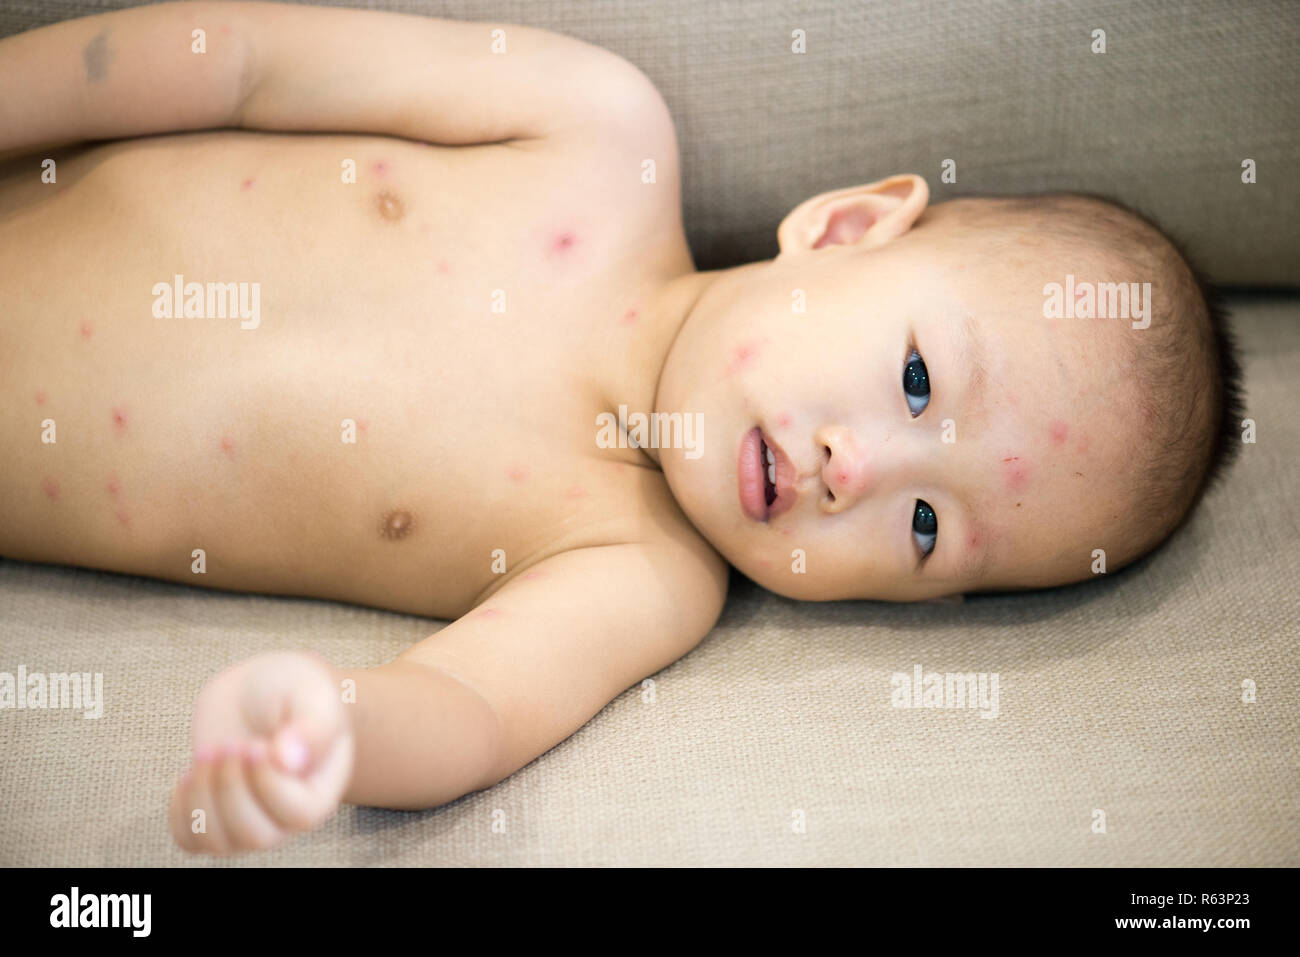 Baby boy with chicken pox lying on sofa Stock Photo